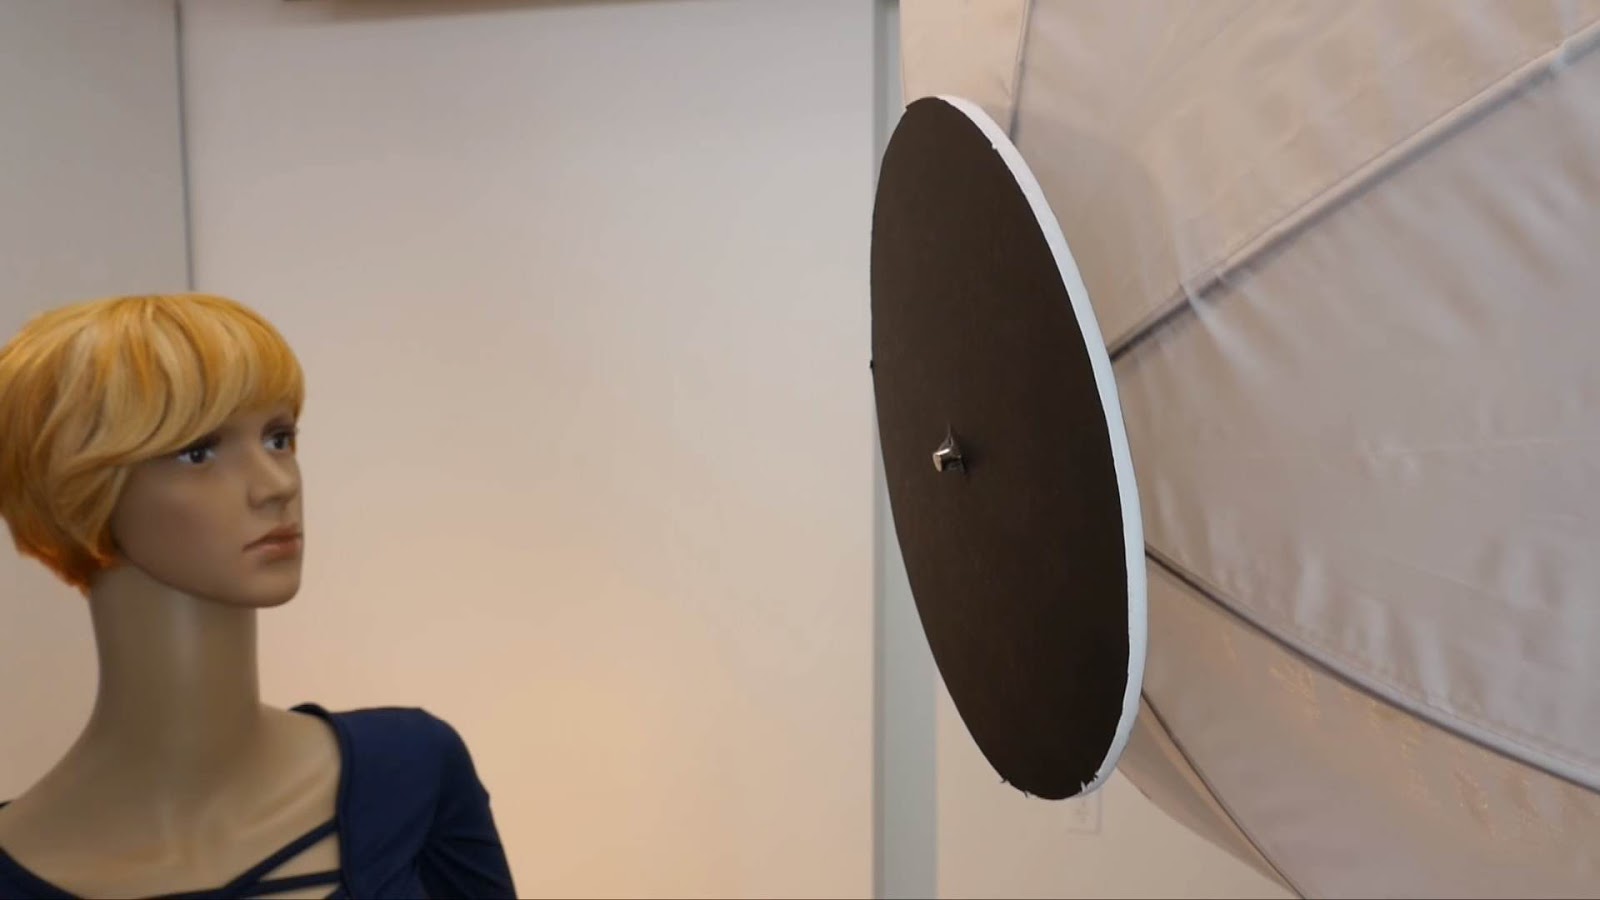 How to make a DIY Beauty Dish with an umbrella for less than $7.00